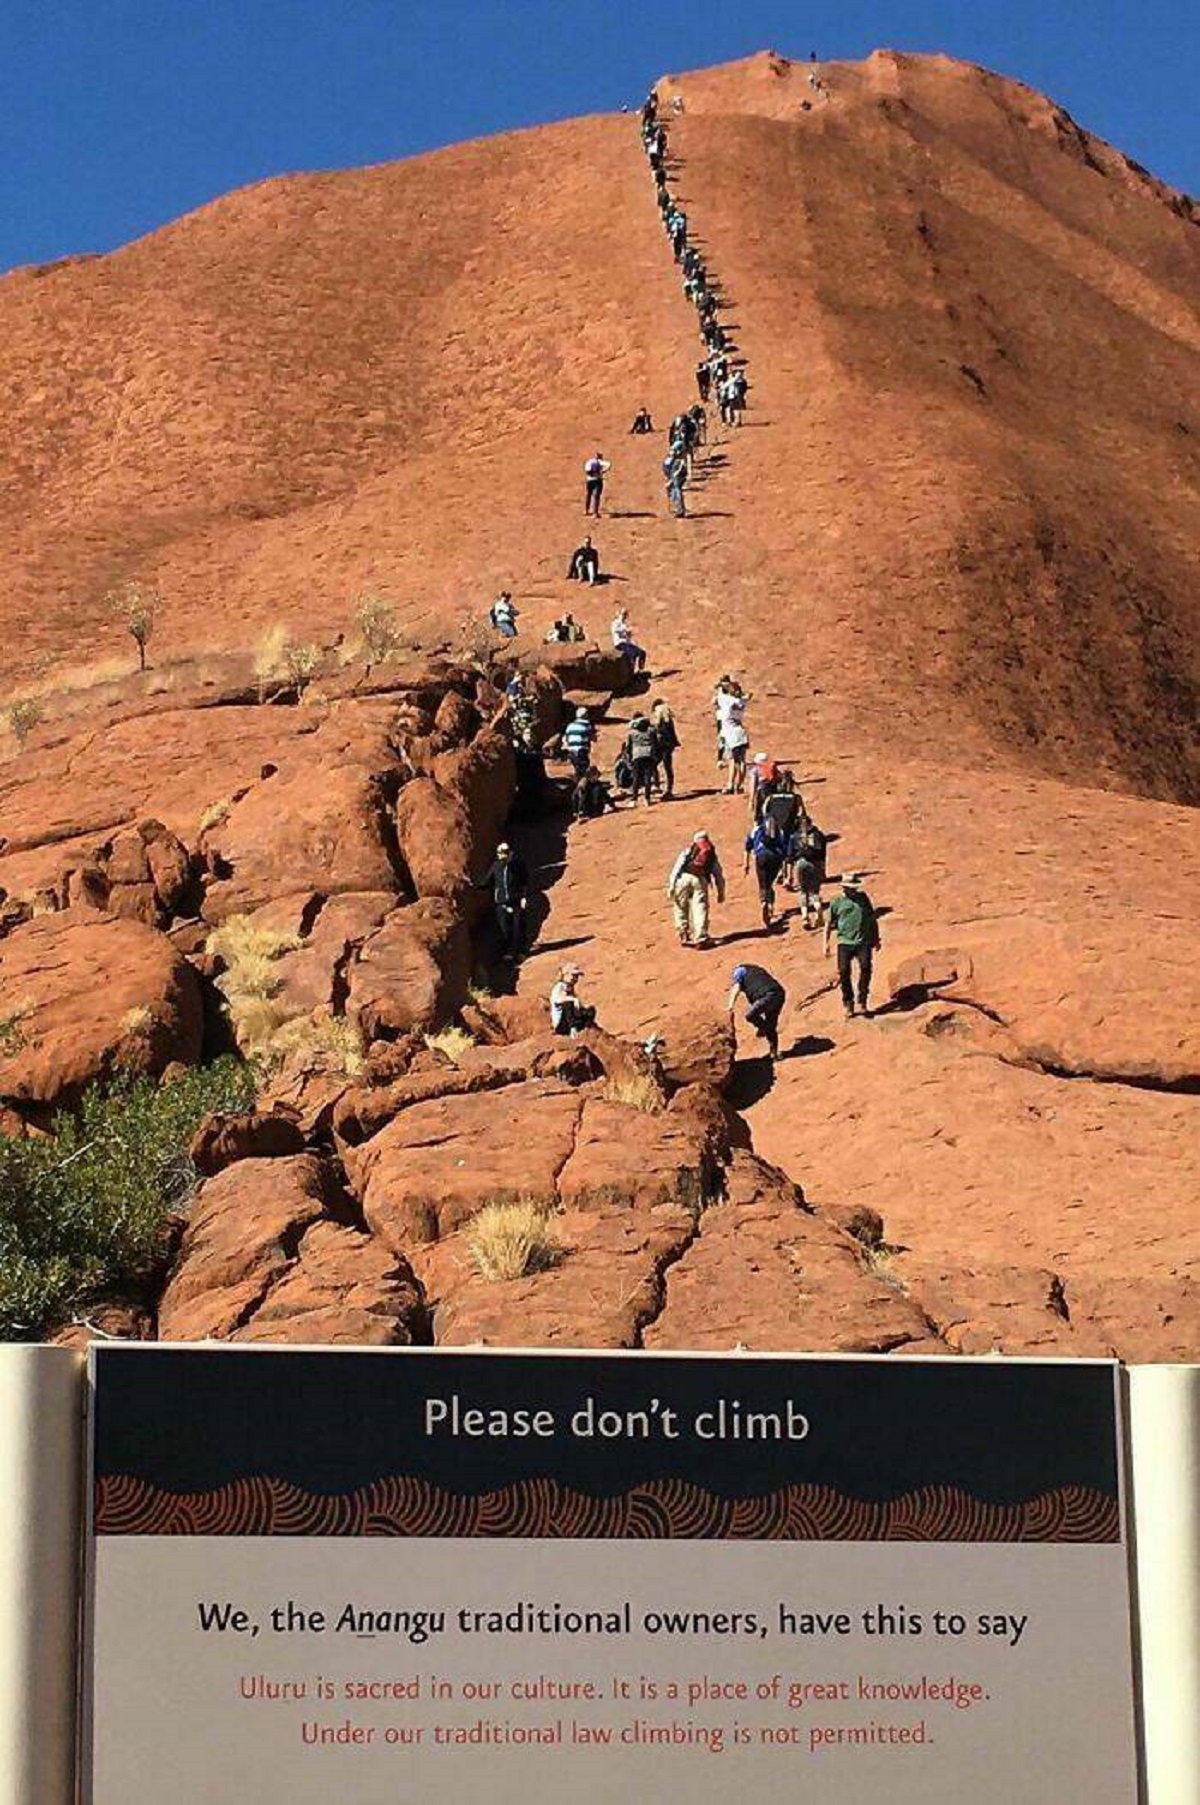 uluru memes - Please don't climb We, the Anangu traditional owners, have this to say Uluru is sacred in our culture. It is a place of great knowledge. Under our baditional law climbing is not permitted.